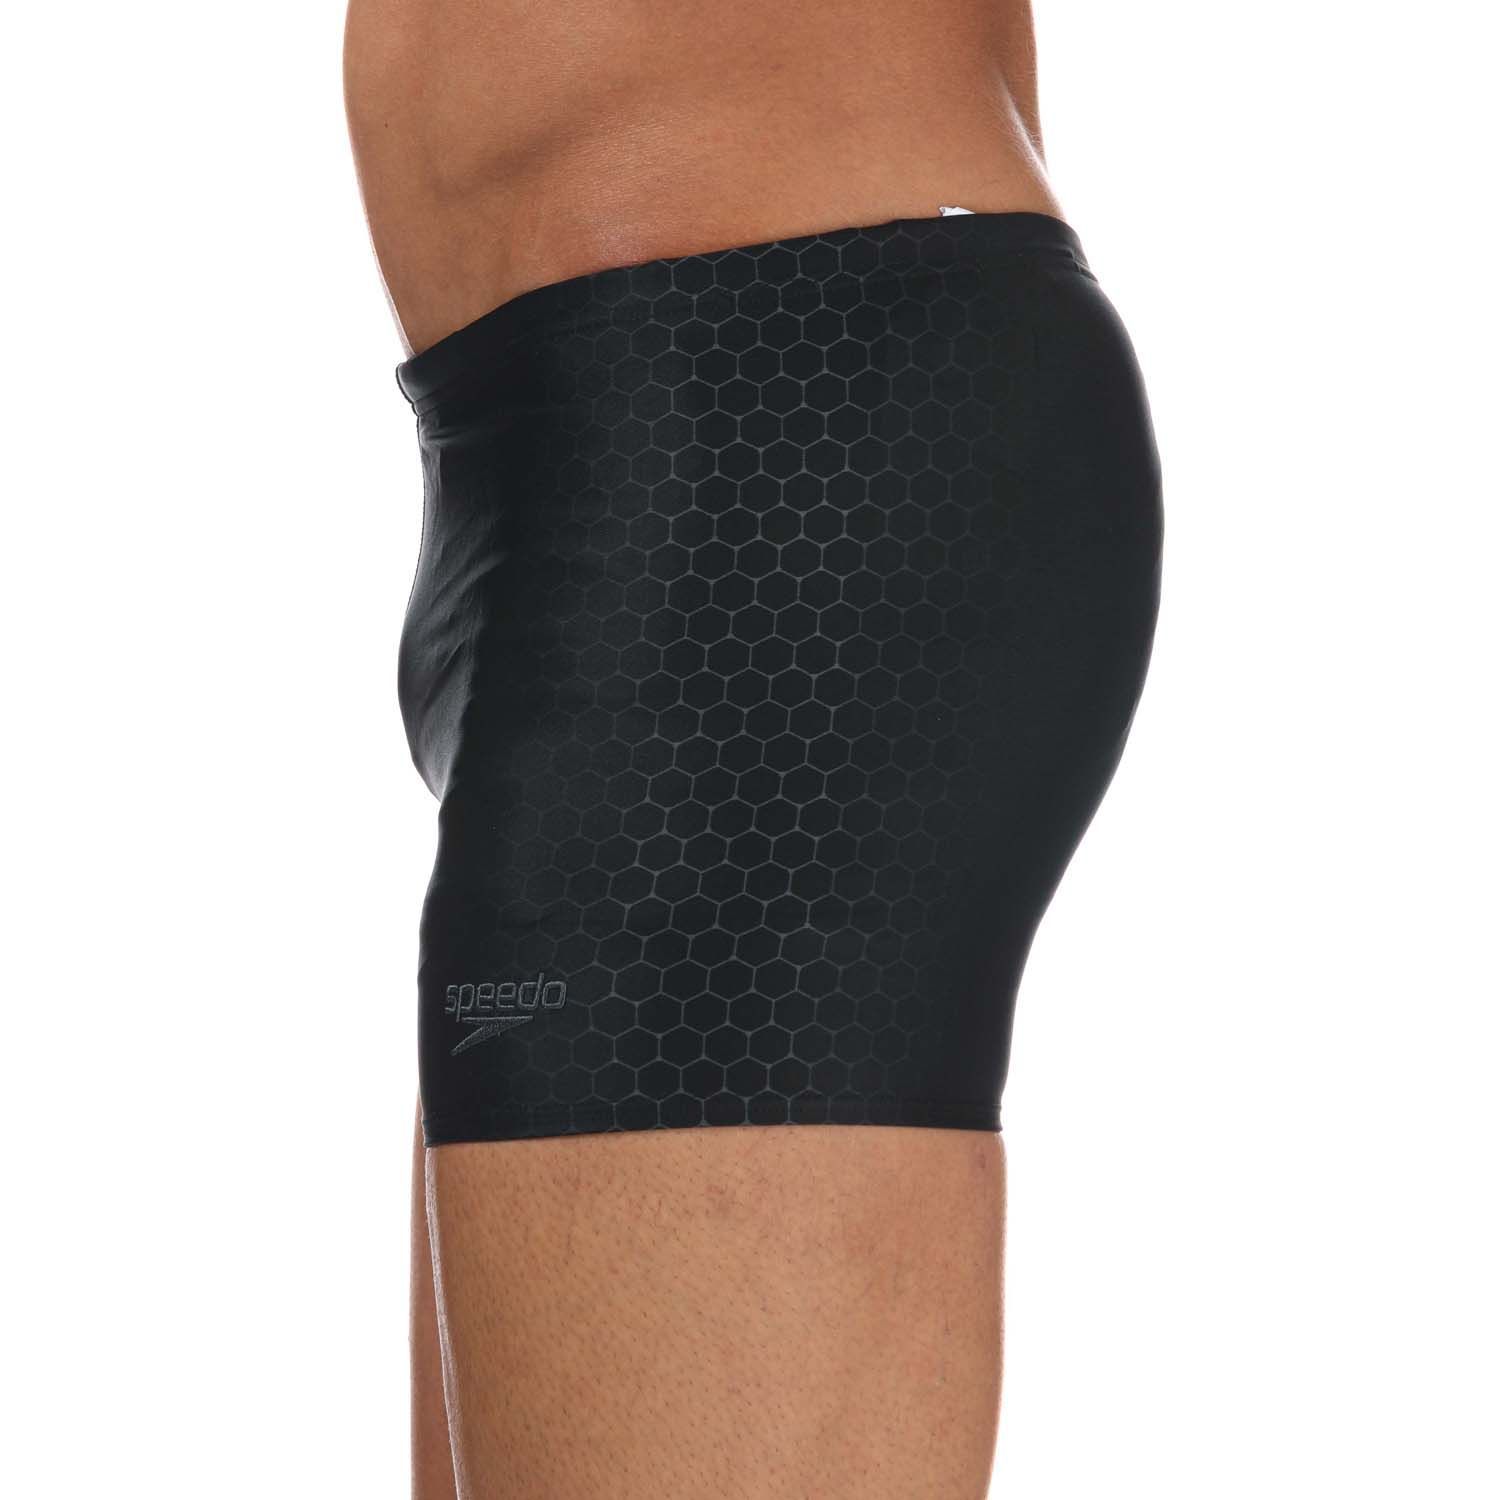 Mens Speedo Placement Aquashort in black grey.- Elastic waistband with adjustment.- Chlorine-resistant material.- Higher material density.- Quick drying.- UNIQUE colorful graphics.- Manufacturer's logo.- Body: 78% Nylon  22% Elastane. Lining: 100% Polyester.- 8124249023